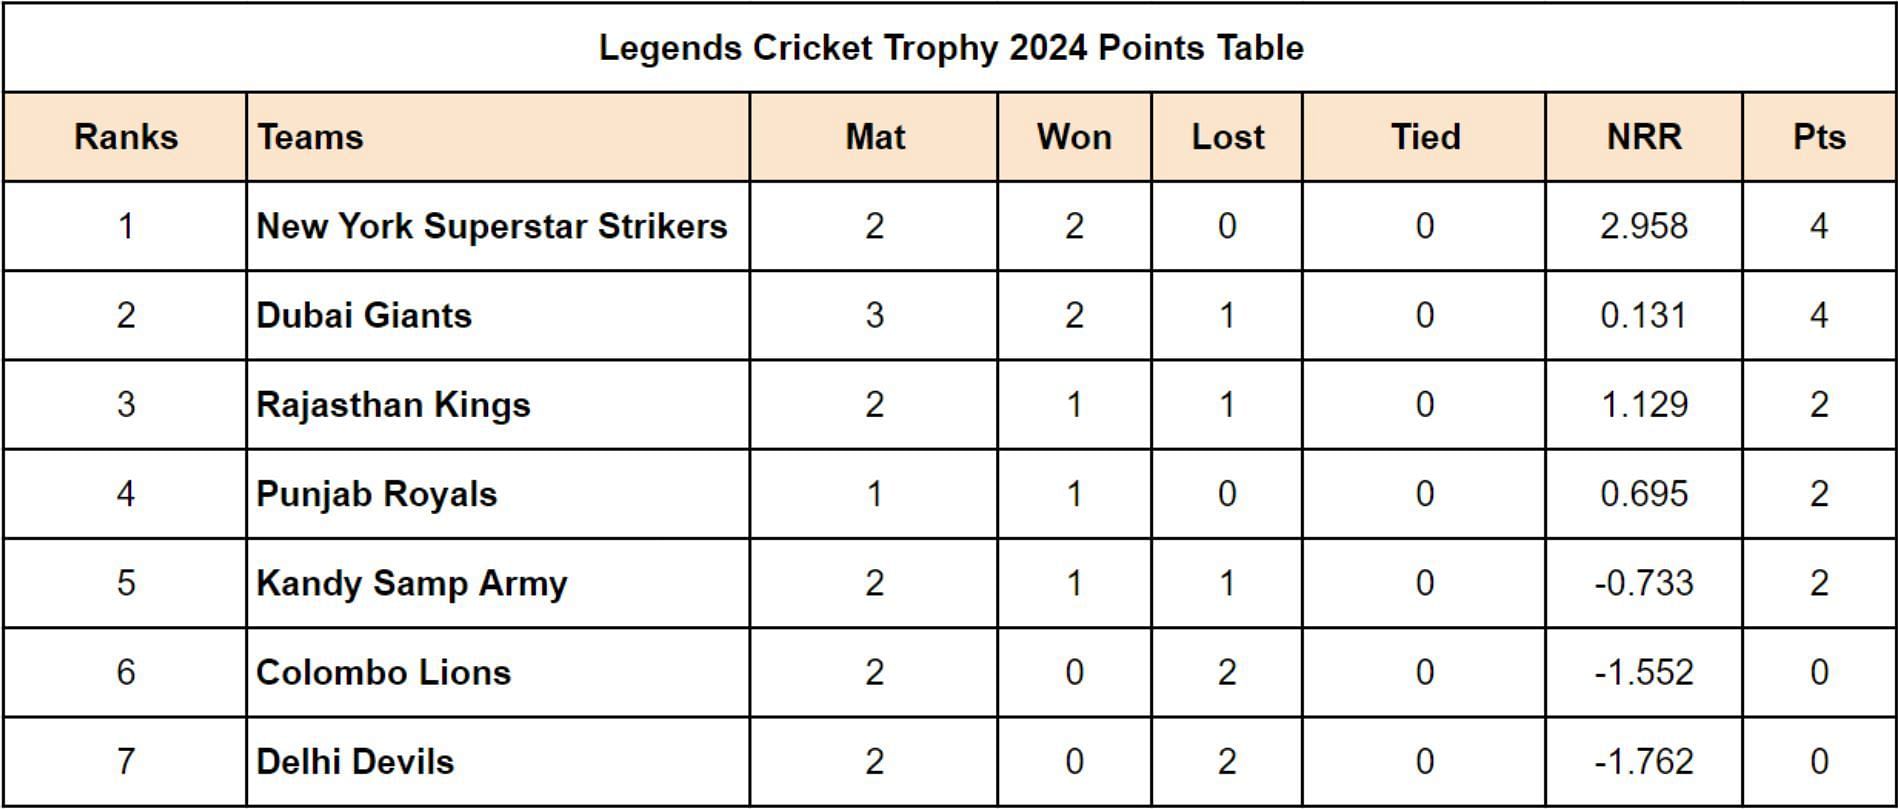 Legends Cricket Trophy 2024 Points Table Updated after Match 7